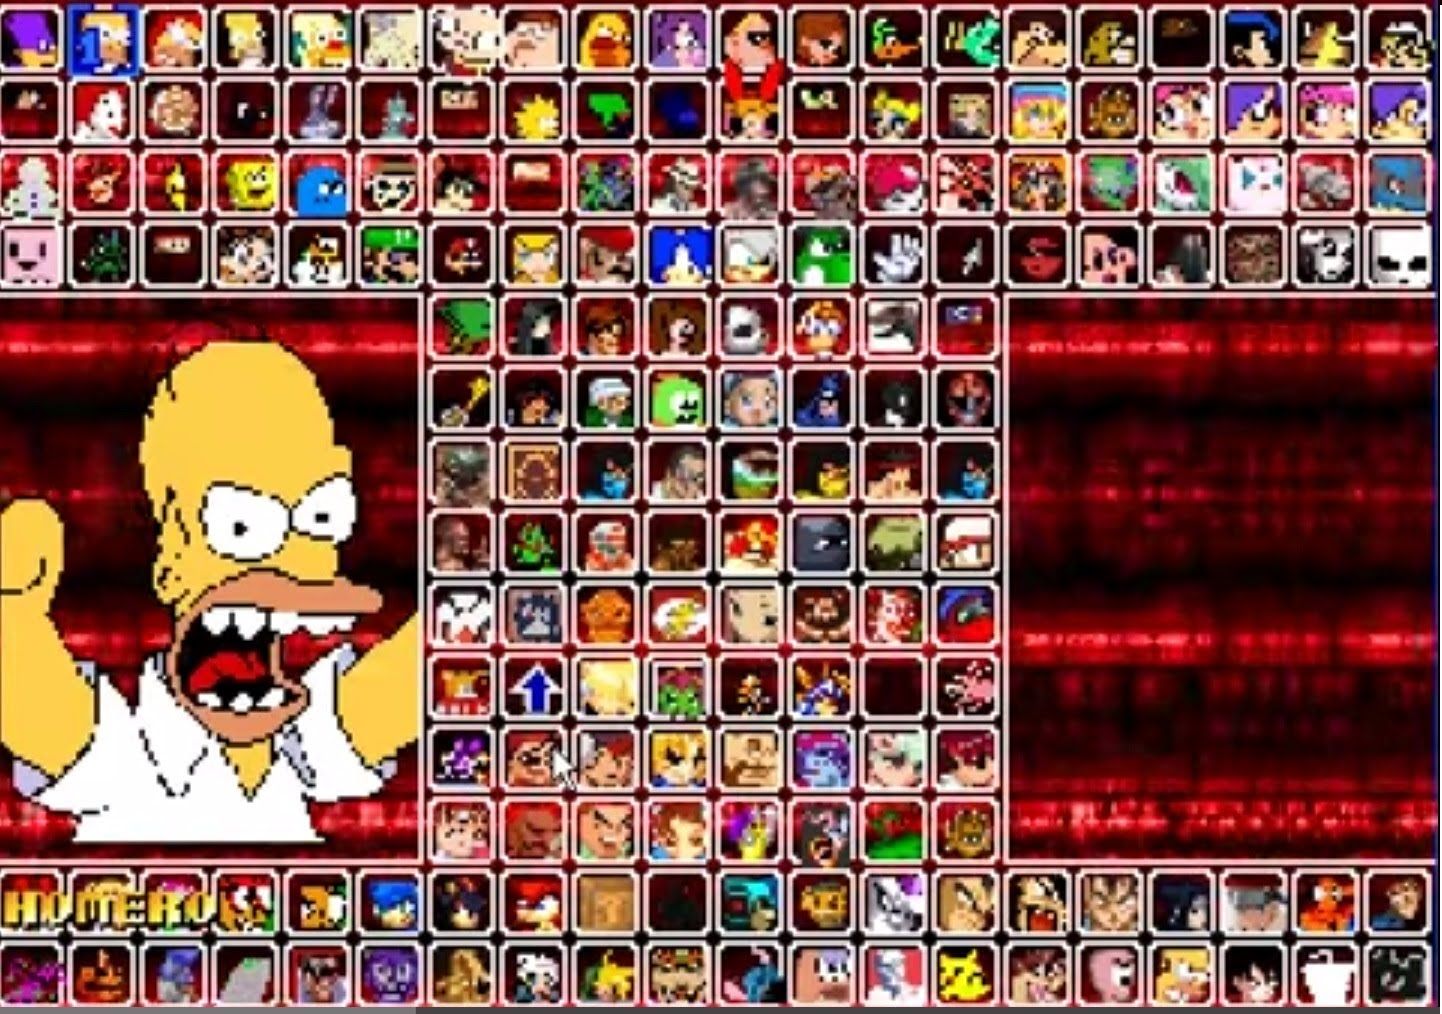 mugen all characters